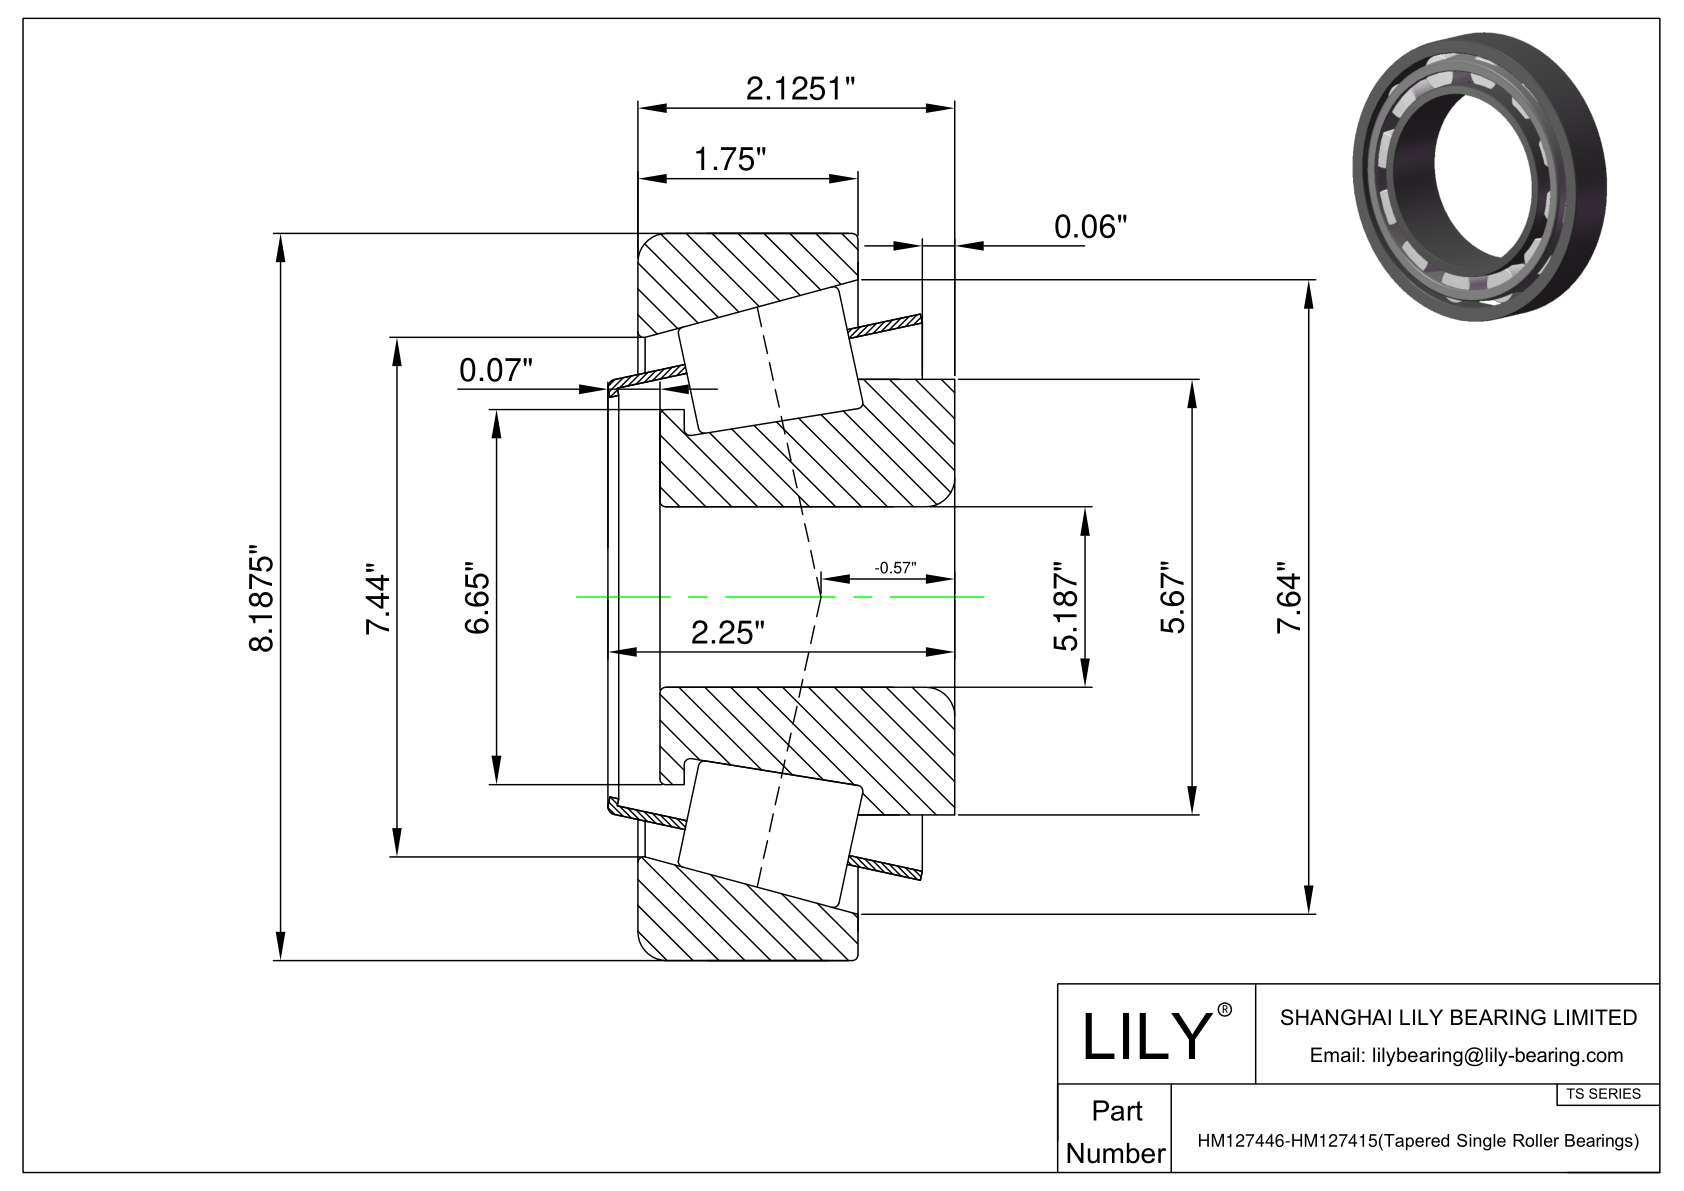 HM127446-HM127415 TS (Tapered Single Roller Bearings) (Imperial) cad drawing